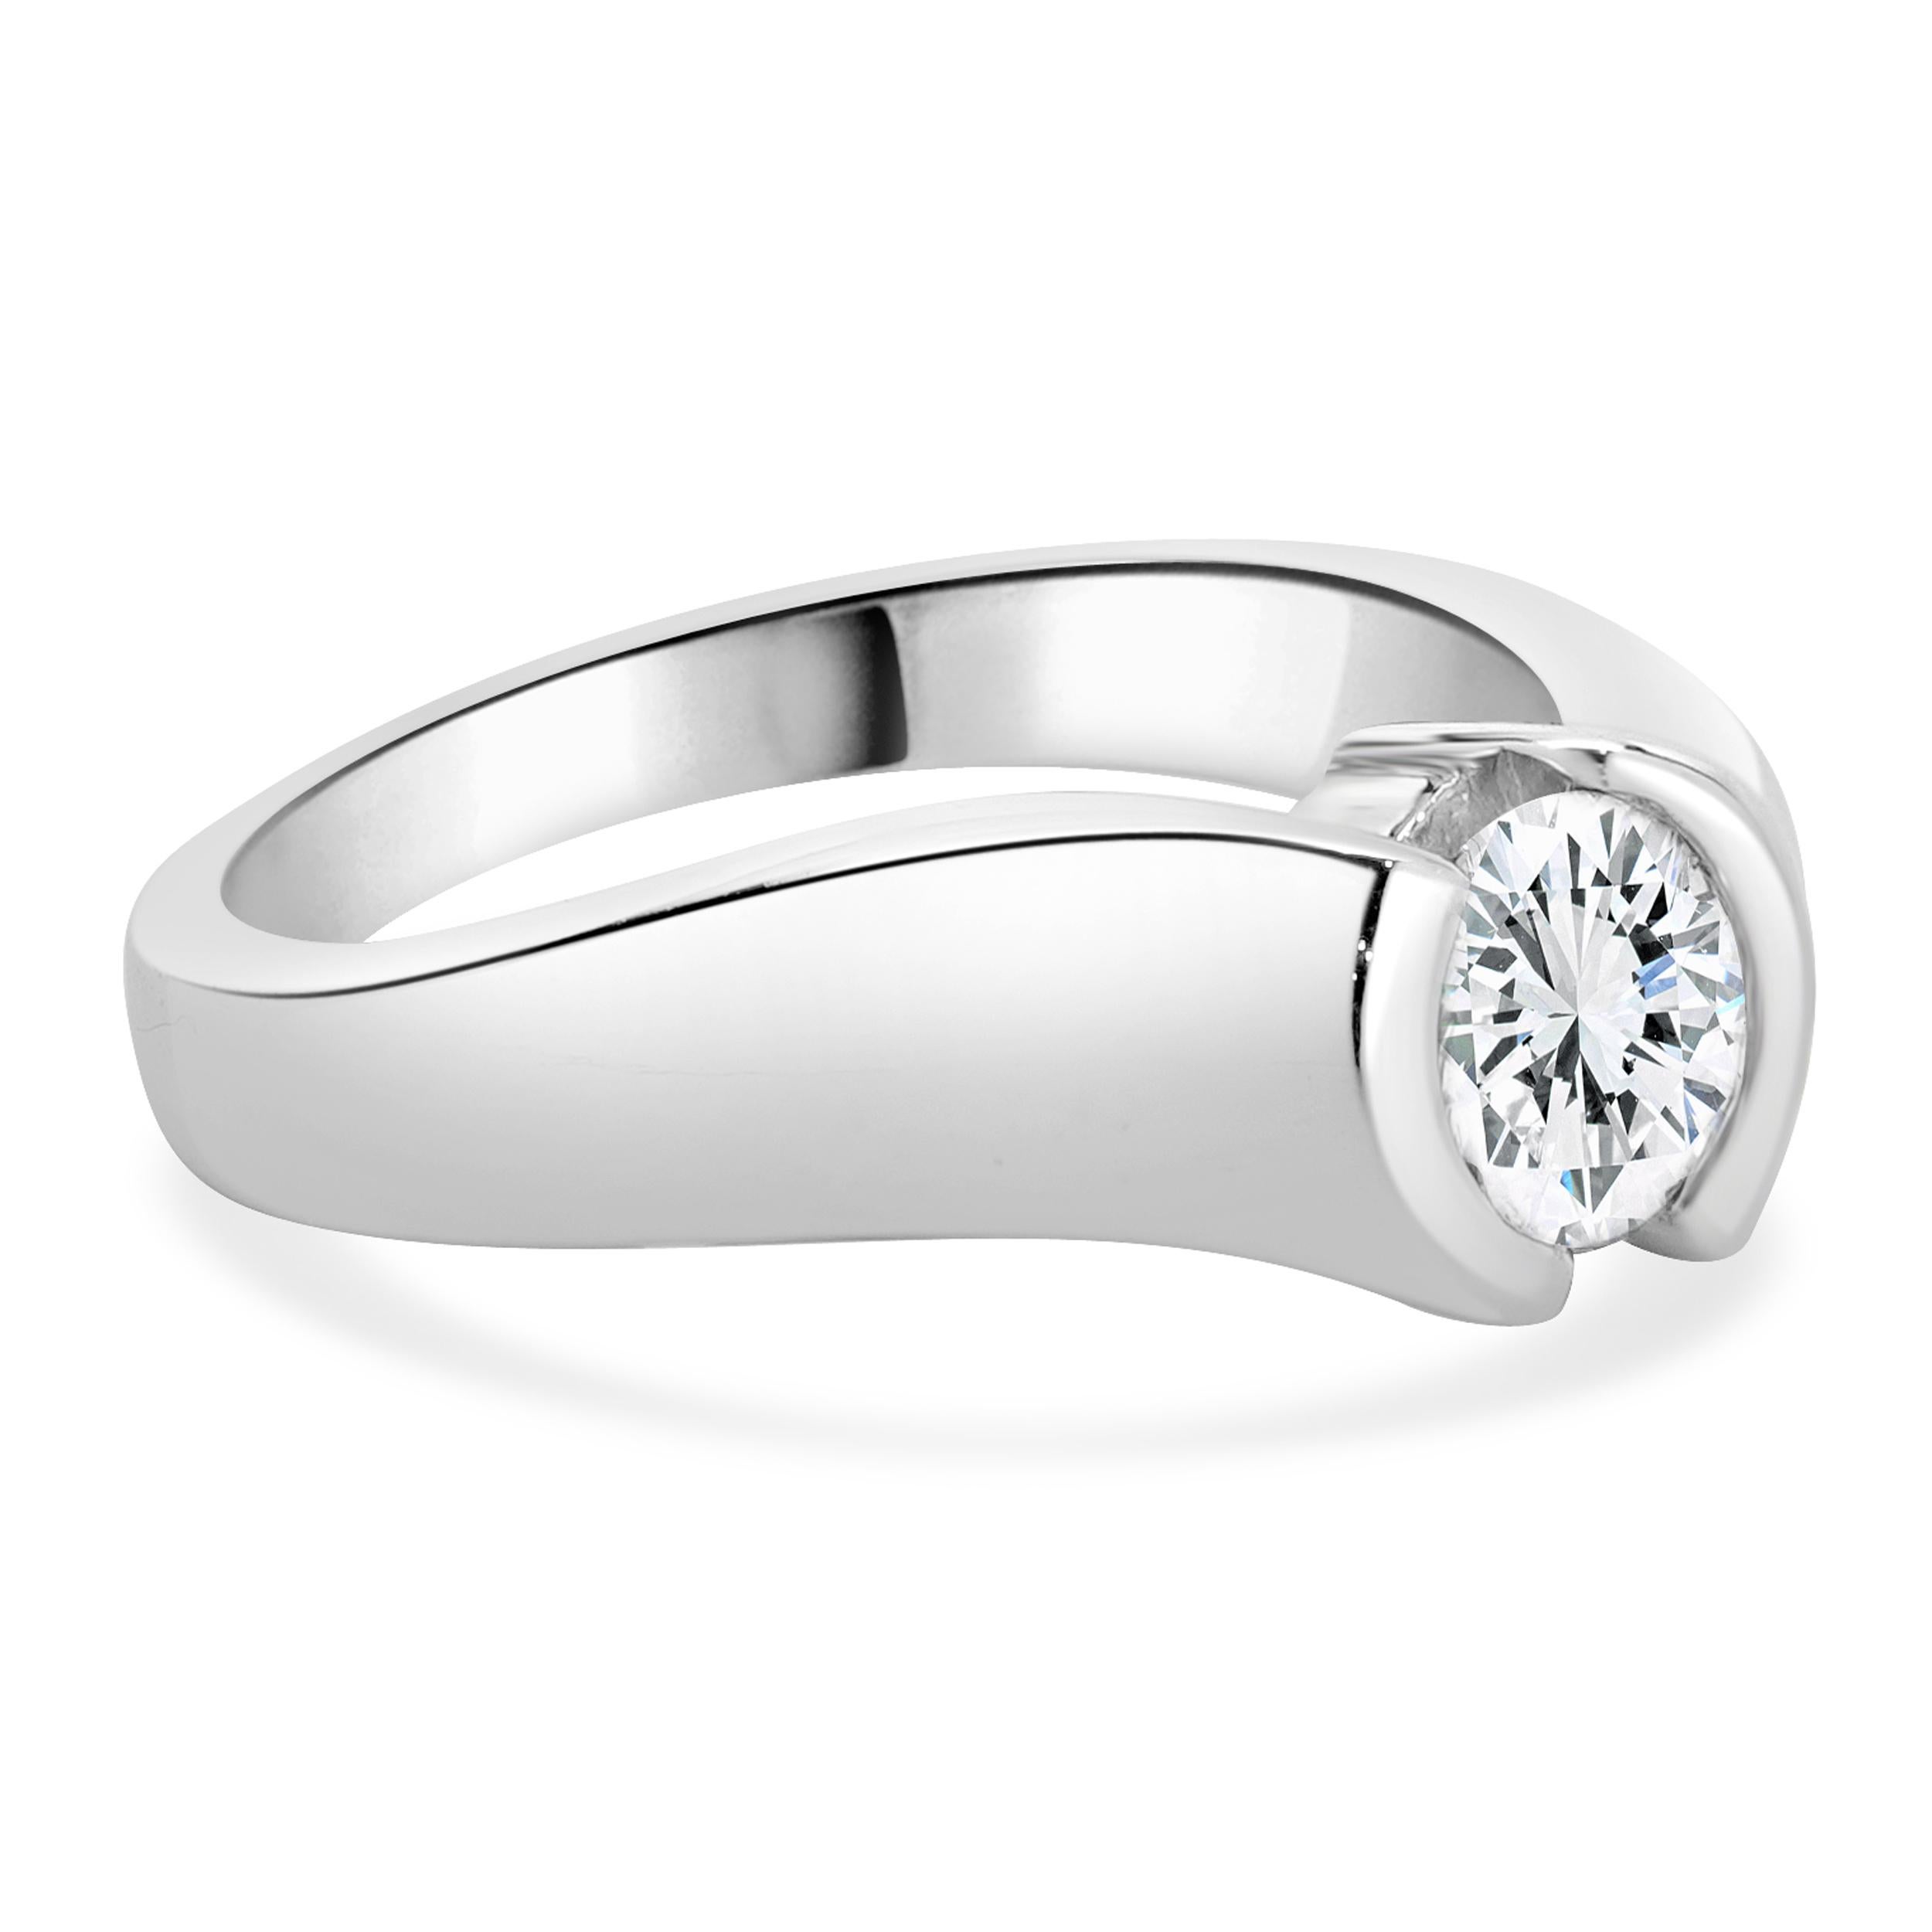 Designer: Kabana
Material: 14K white gold
Diamond: 1 round brilliant cut =0.55cttw
Color: G
Clarity: VS2
Dimensions: ring top measures 7mm wide
Ring Size: 7 (complimentary sizing available)
Weight: 6.47 grams
